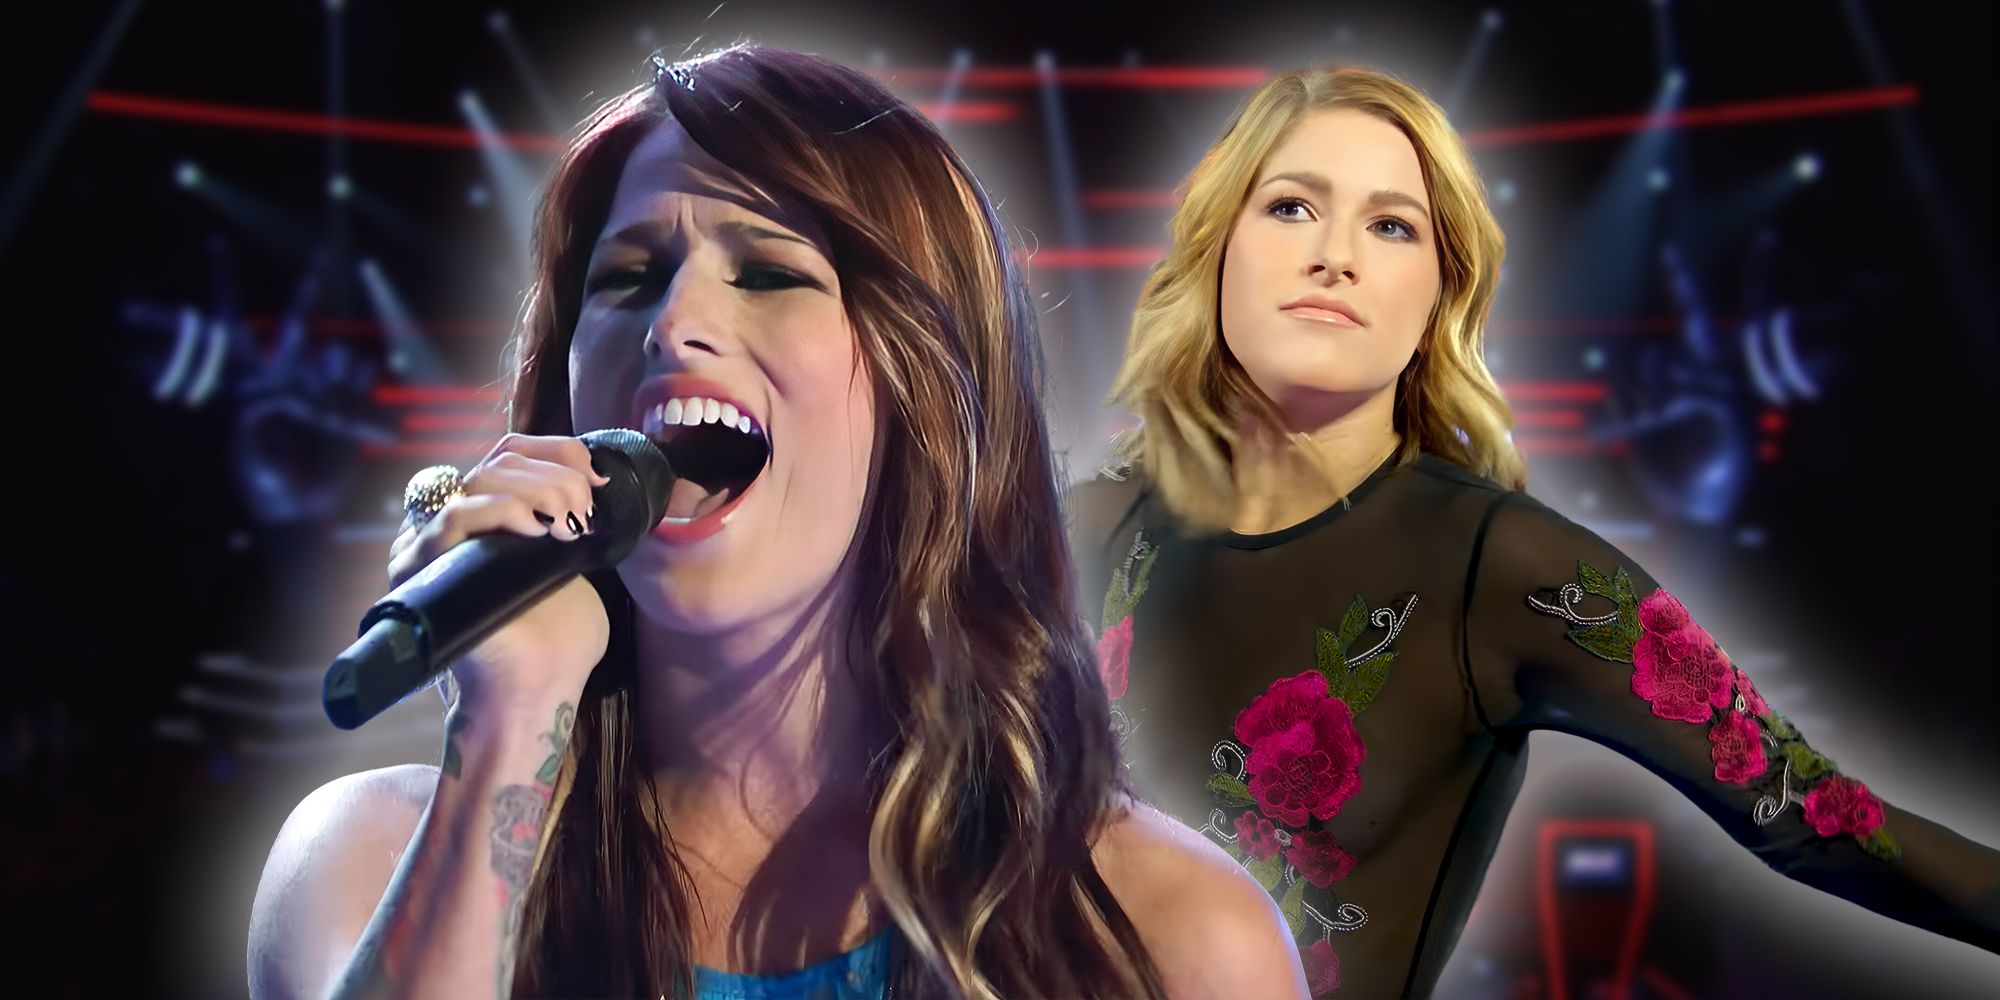 Why 'The Voice' hasn't produced a big star in its 10 years